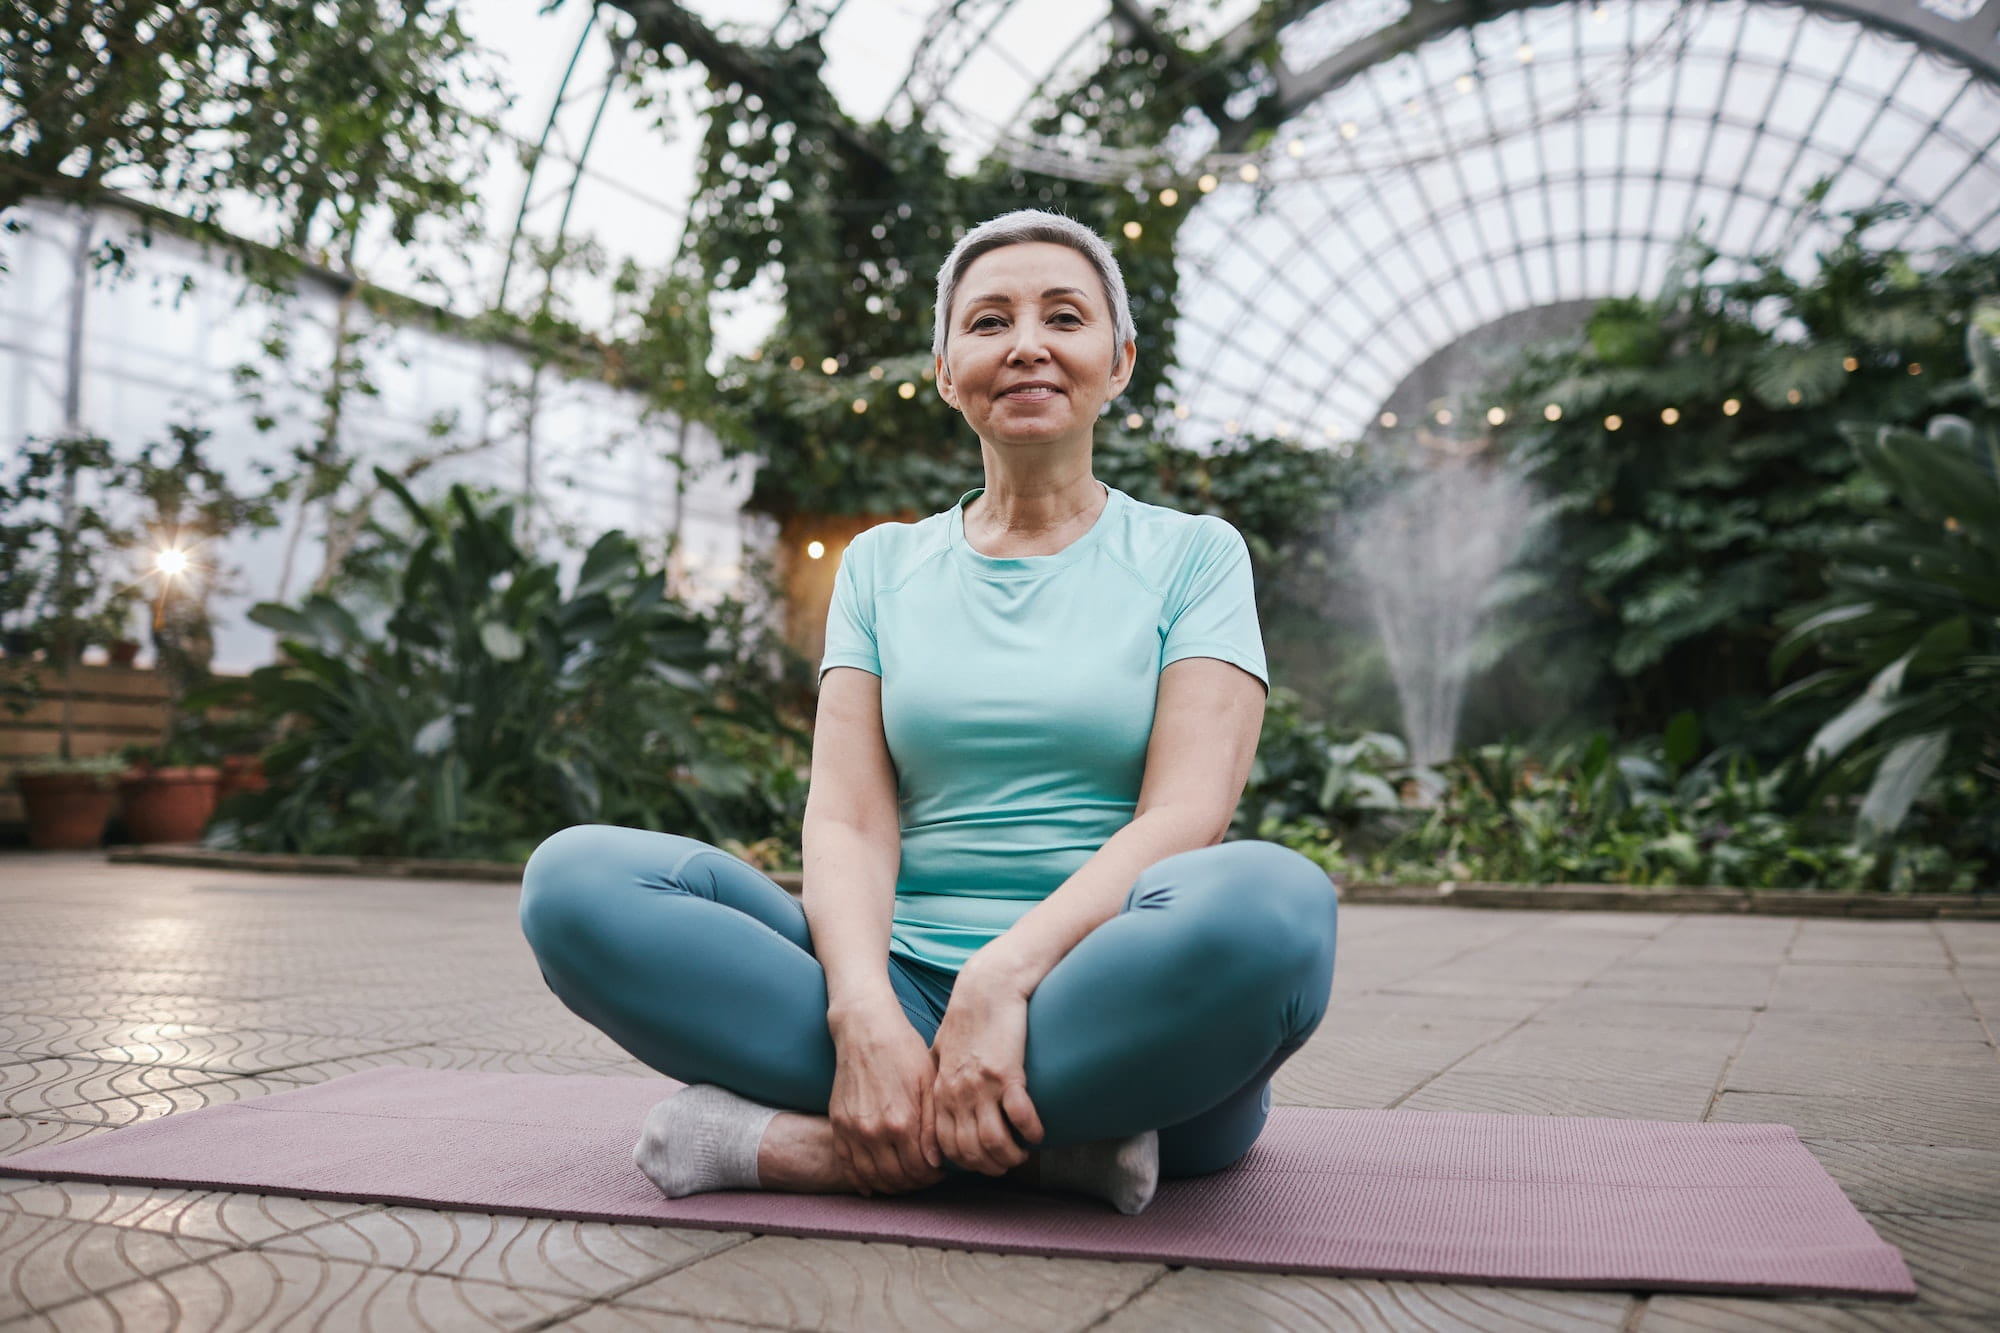 Happy woman sat on a yoga mat with plants around her